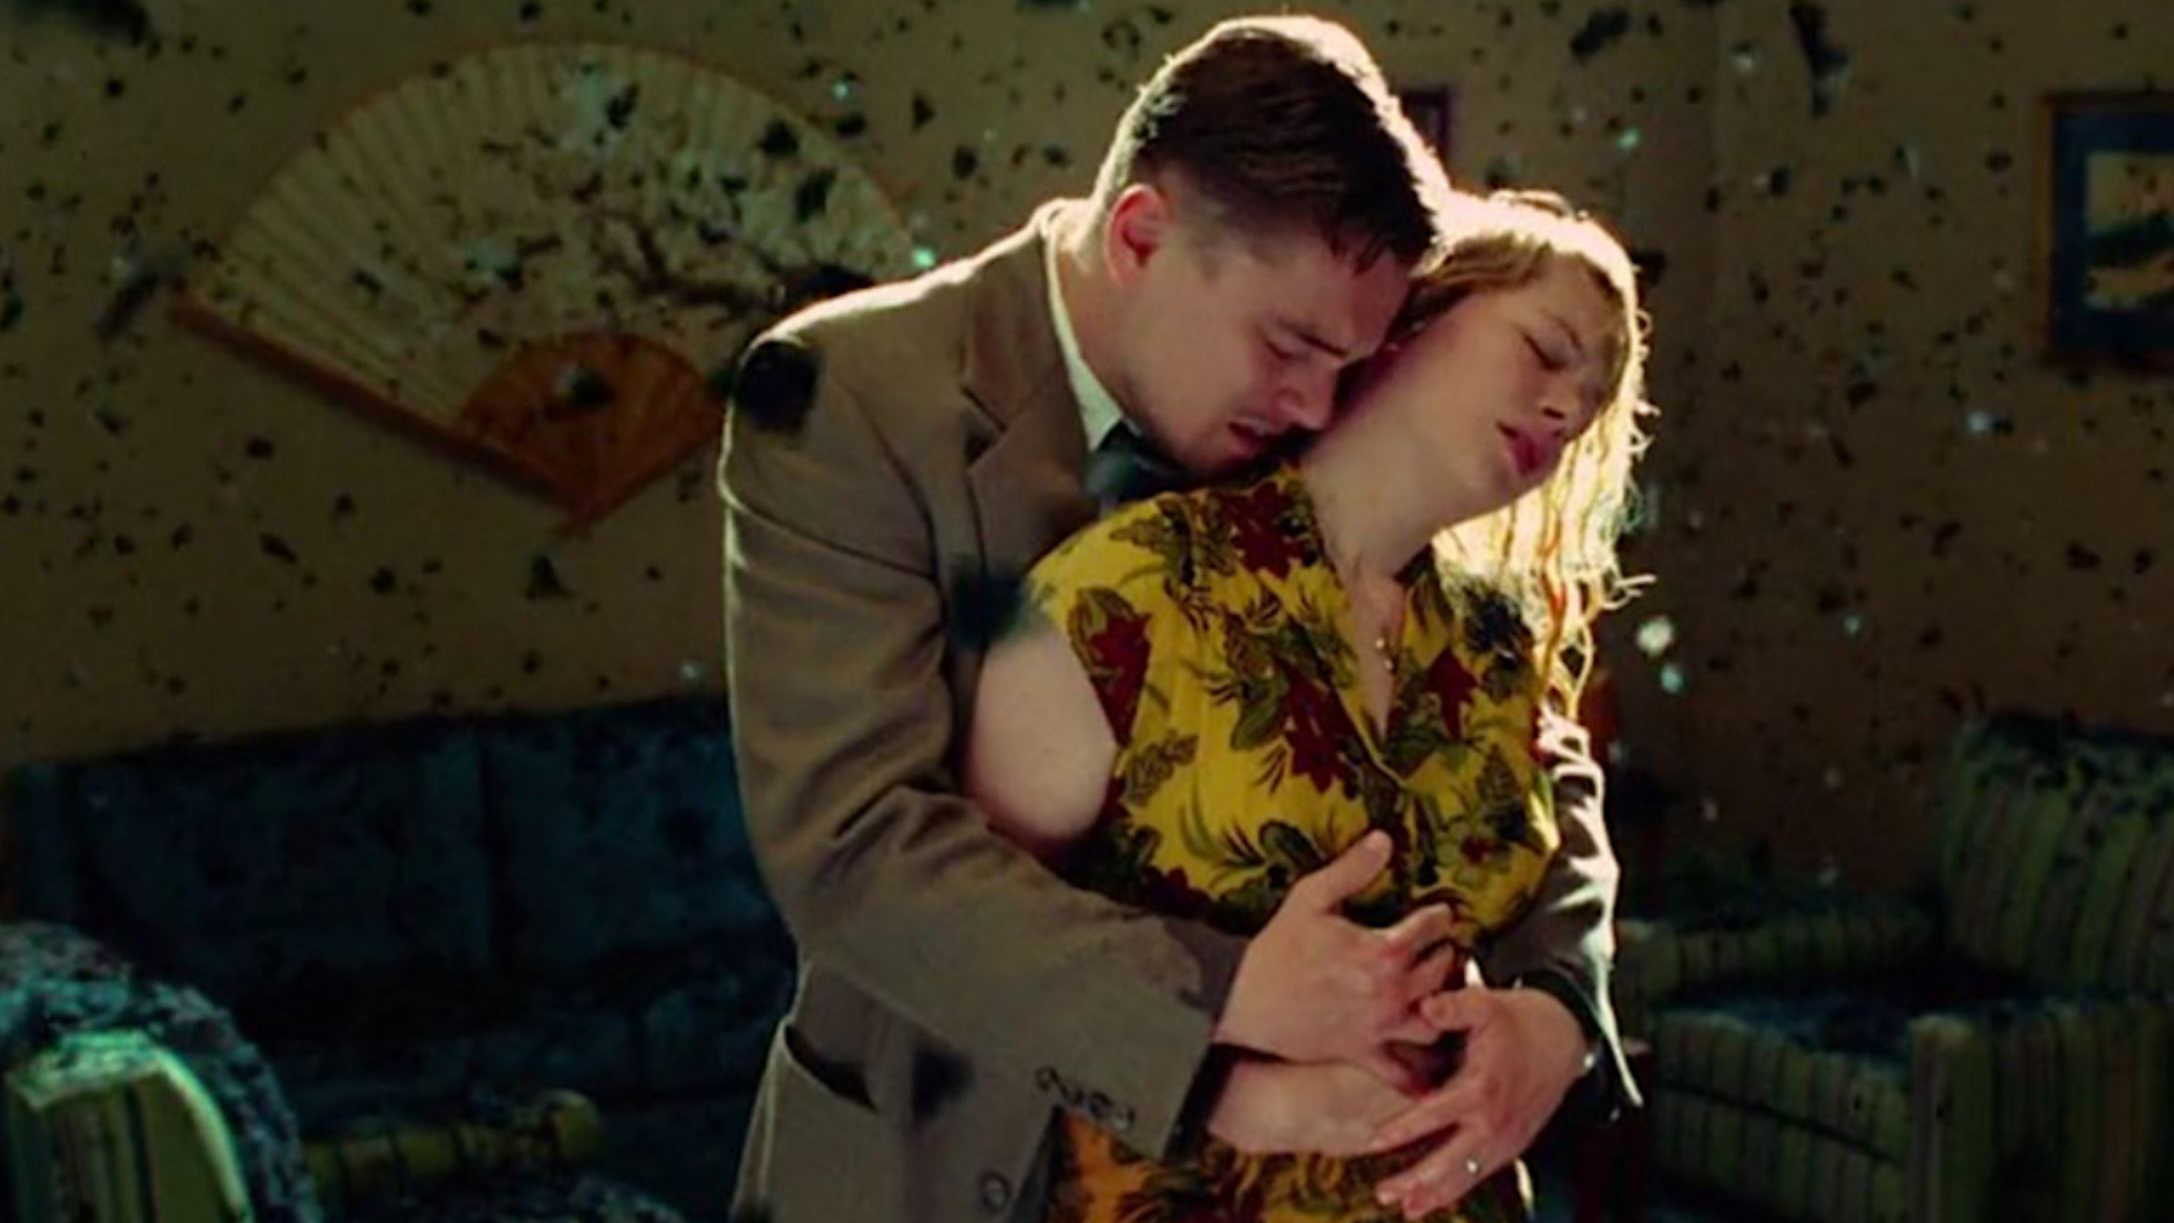 A still from the movie Shutter Island in which Leonardo DiCaprio's character Teddy hugs Michelle Williams' character, Dolores.